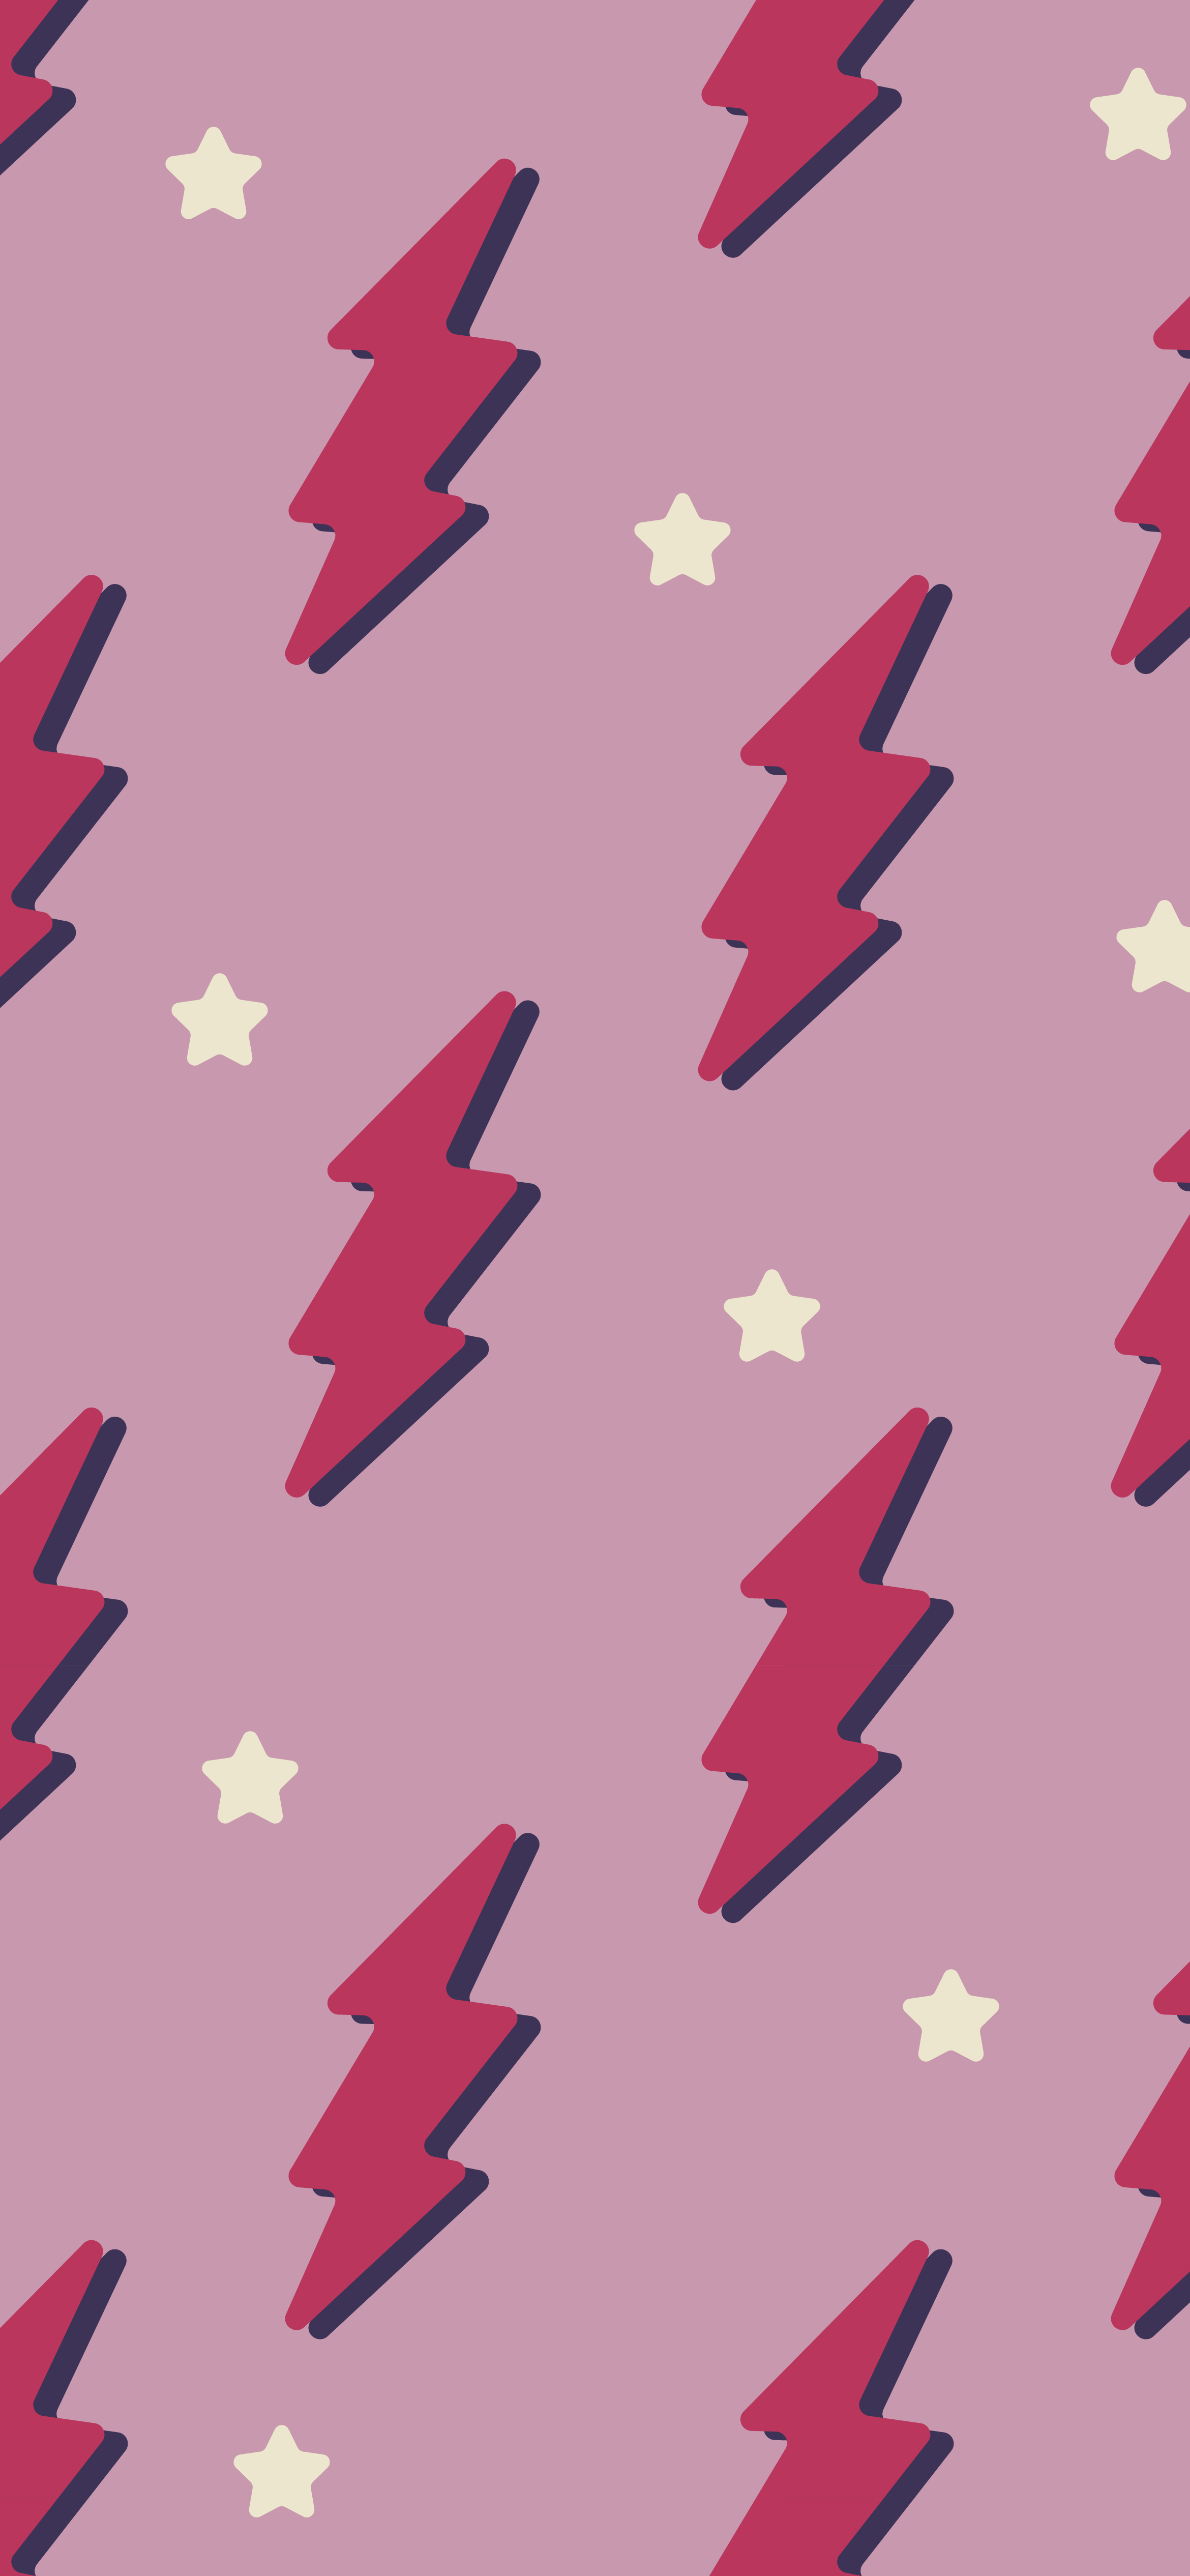 A pink wallpaper with red Christmas trees and yellow stars. - Preppy